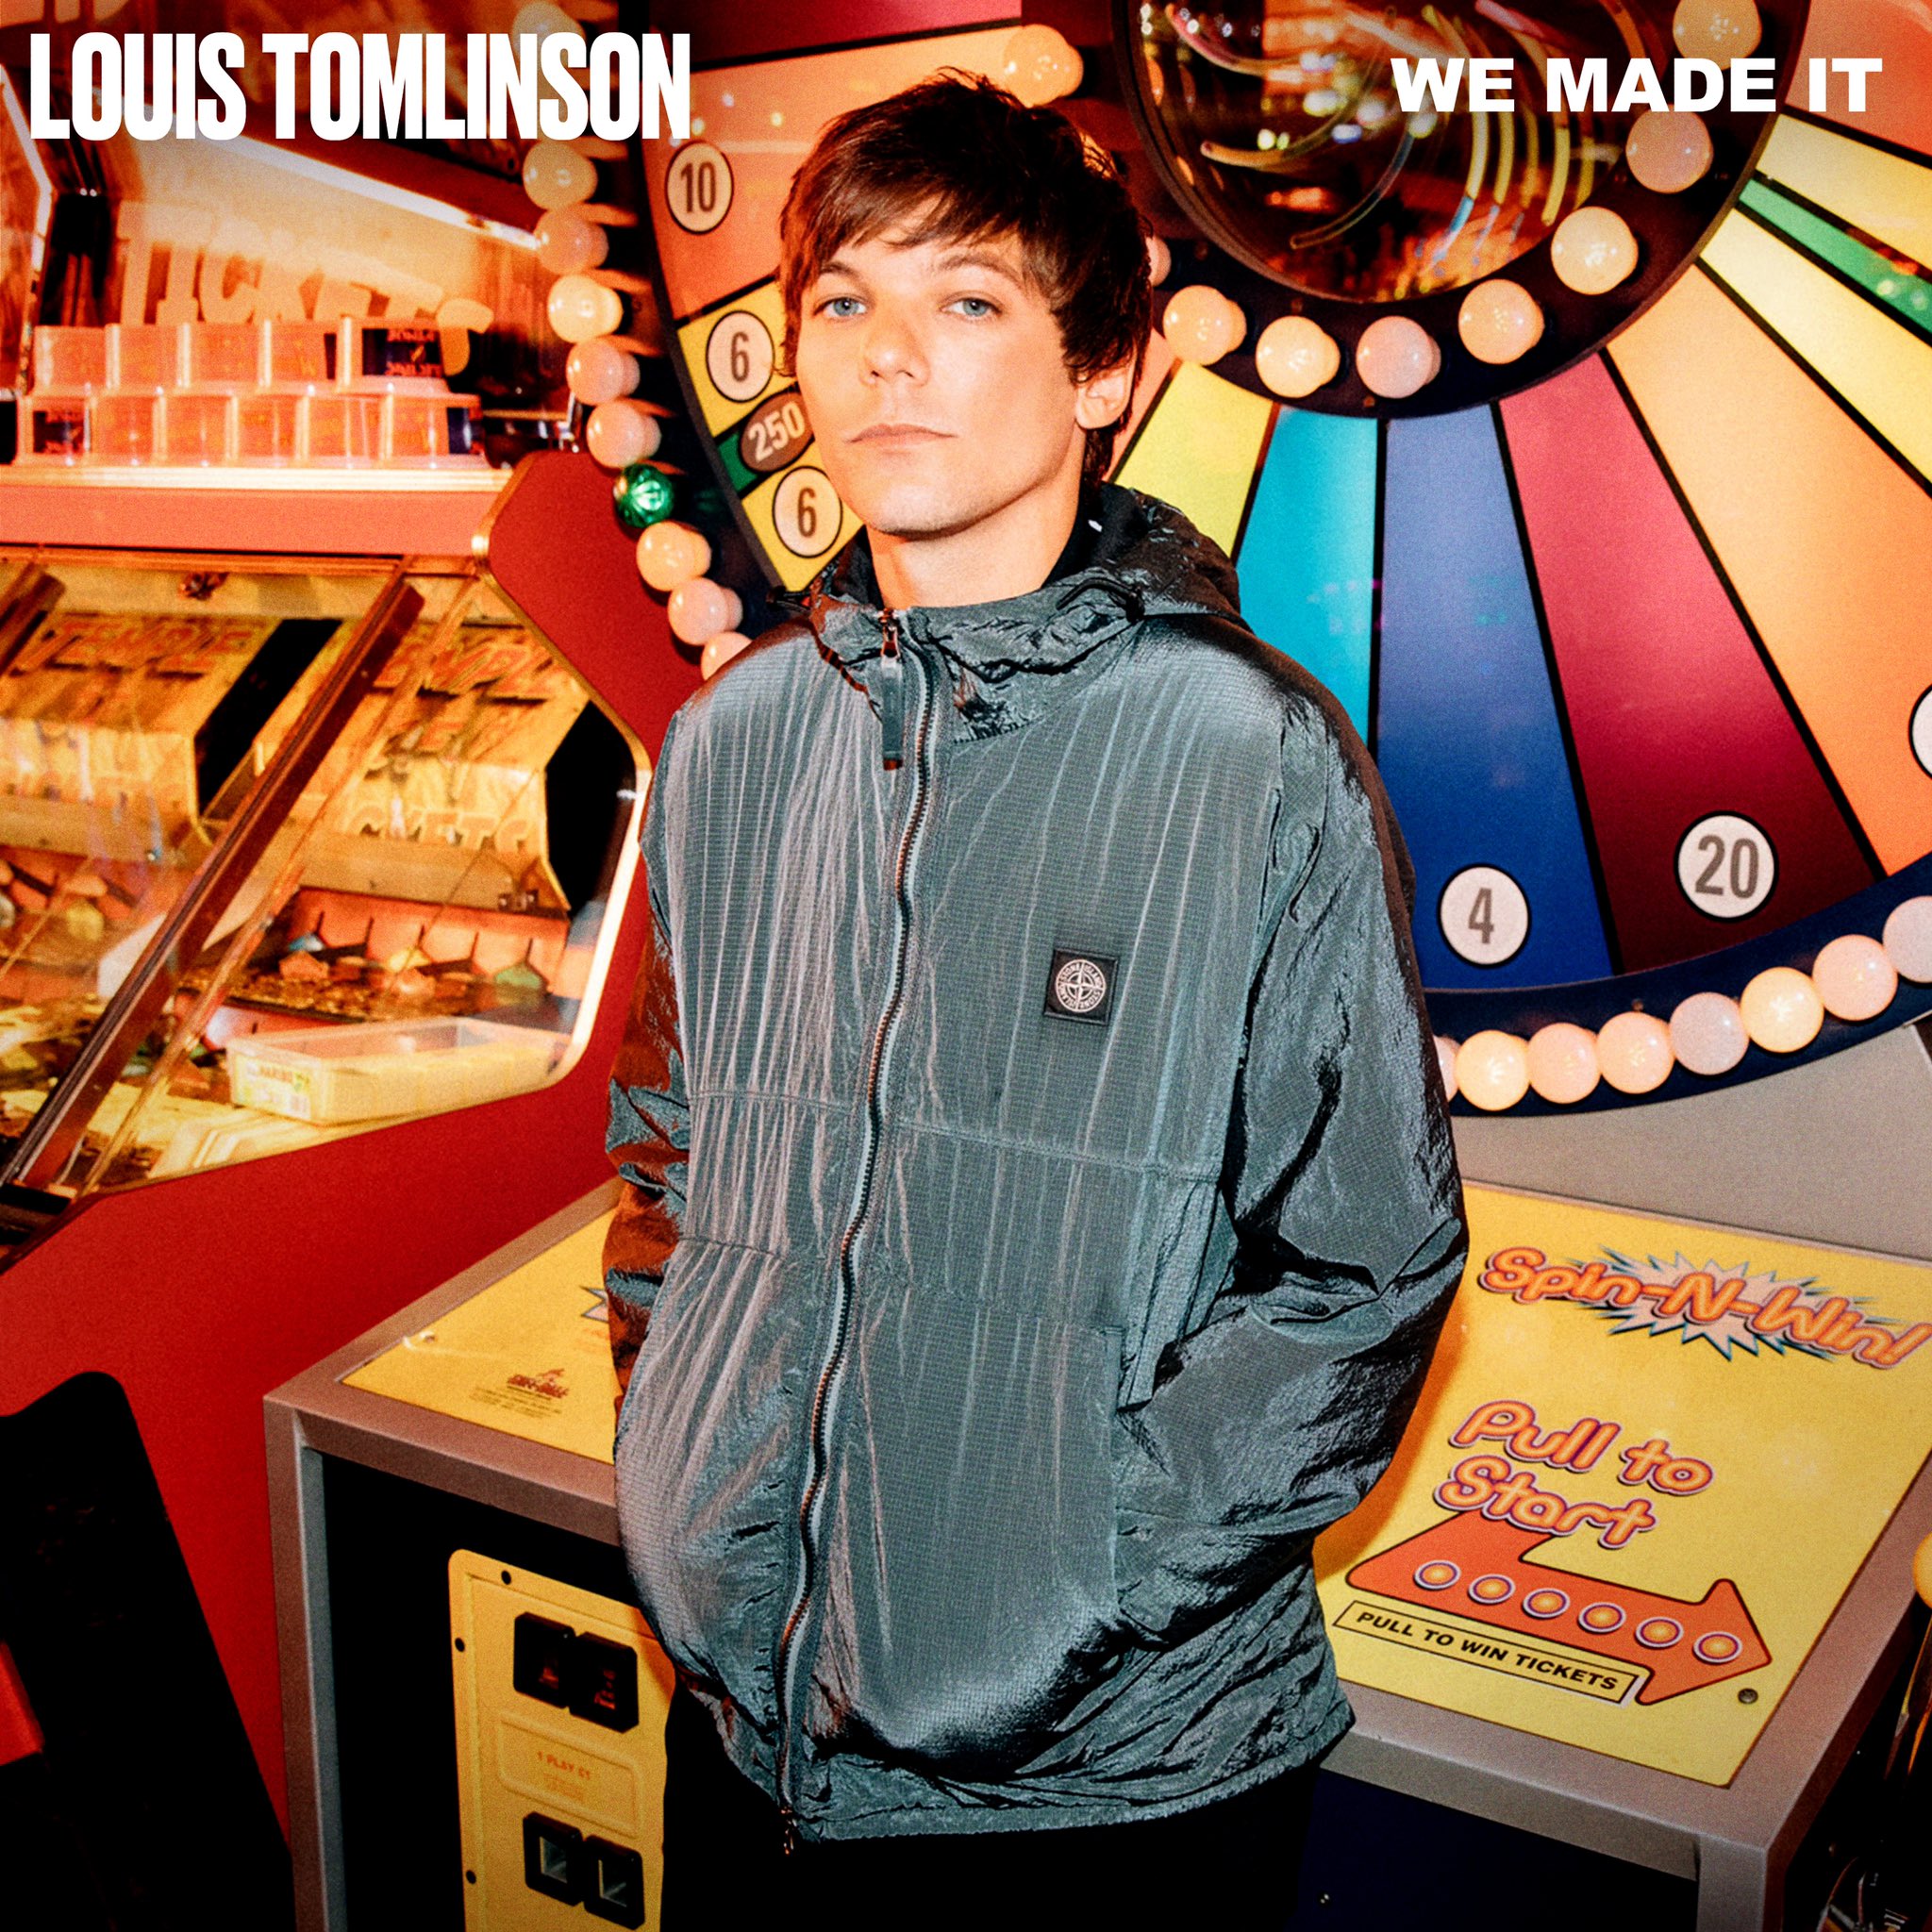 Louis Tomlinson - Two of Us Chords